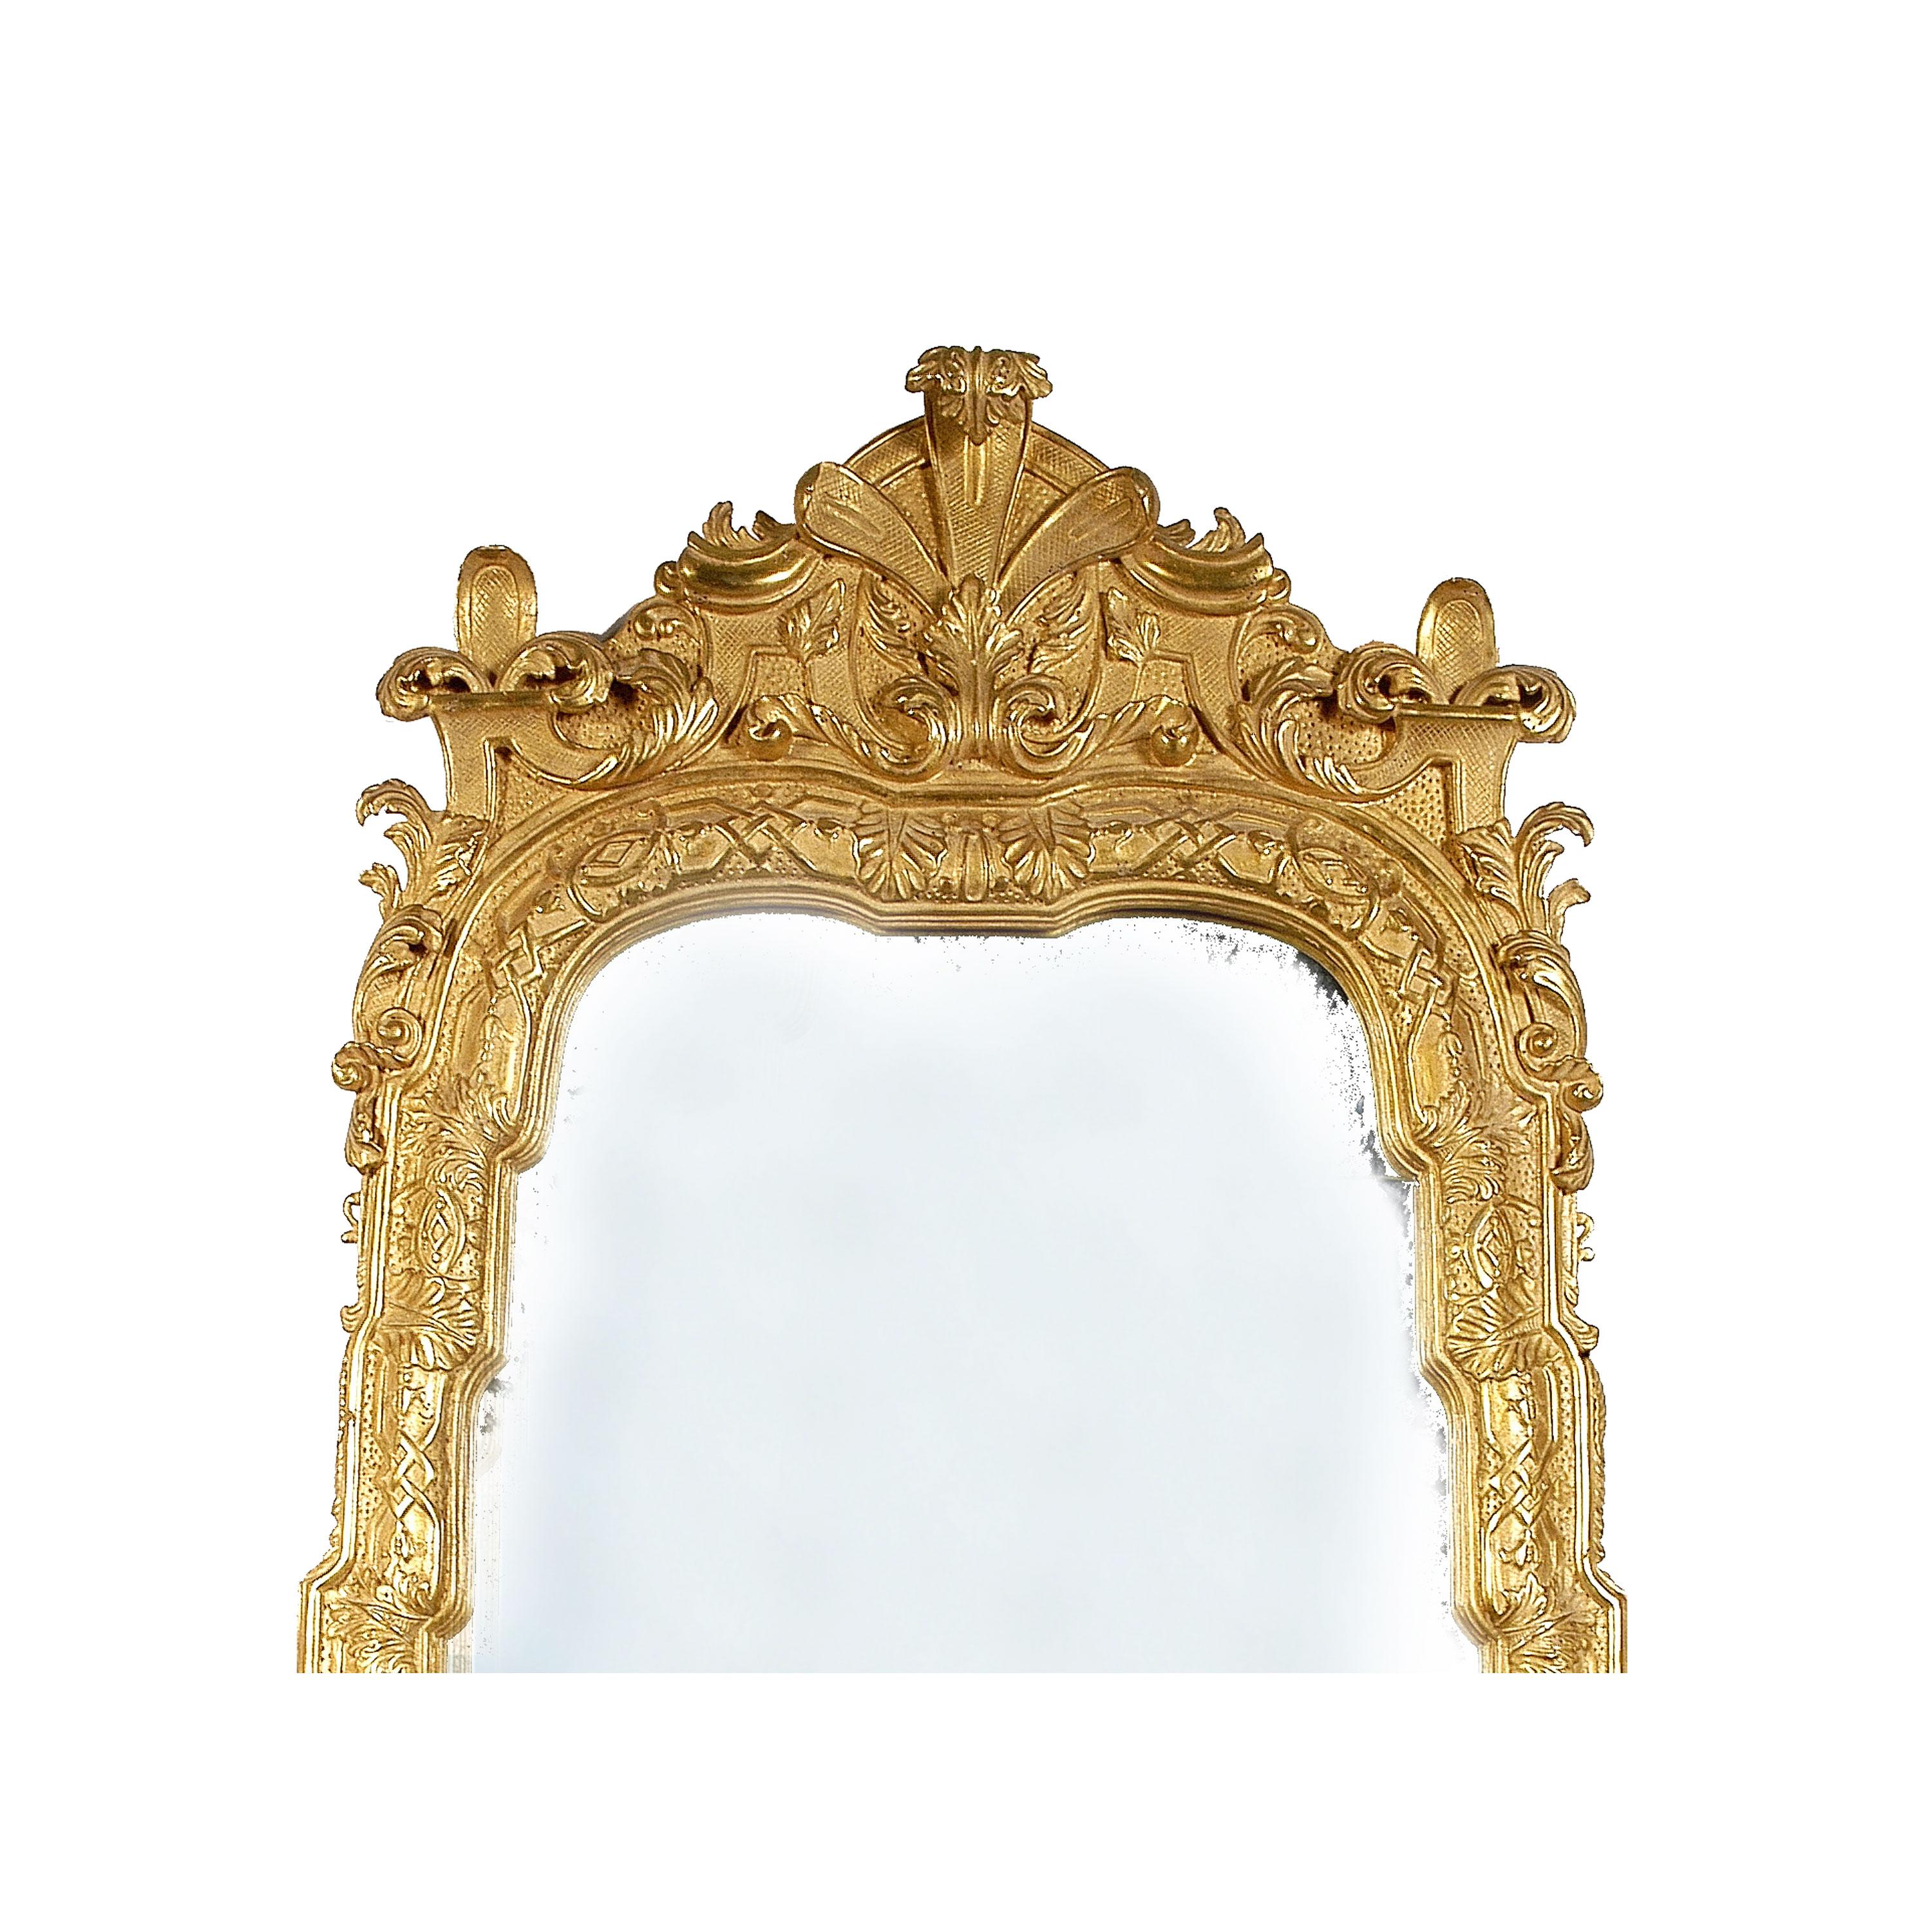 Neoclassical Regency style handcrafted mirror. Rectangular hand carved wooden structure with gold foiled finish.
Spain, 1970.